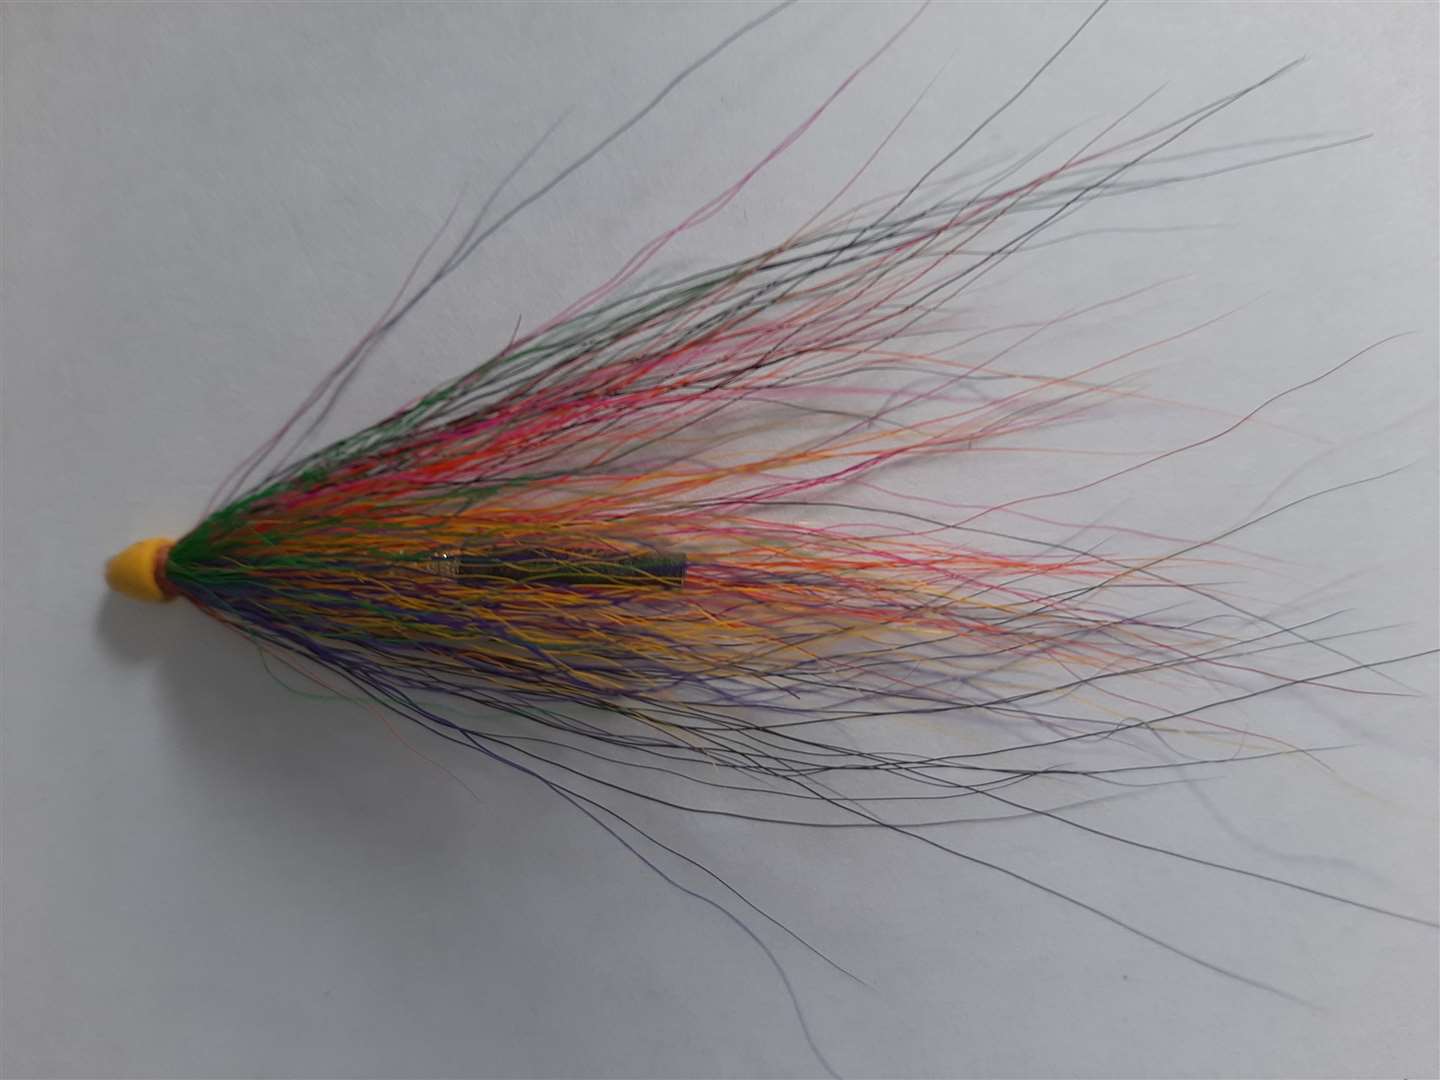 One of the colourful fishing flies.